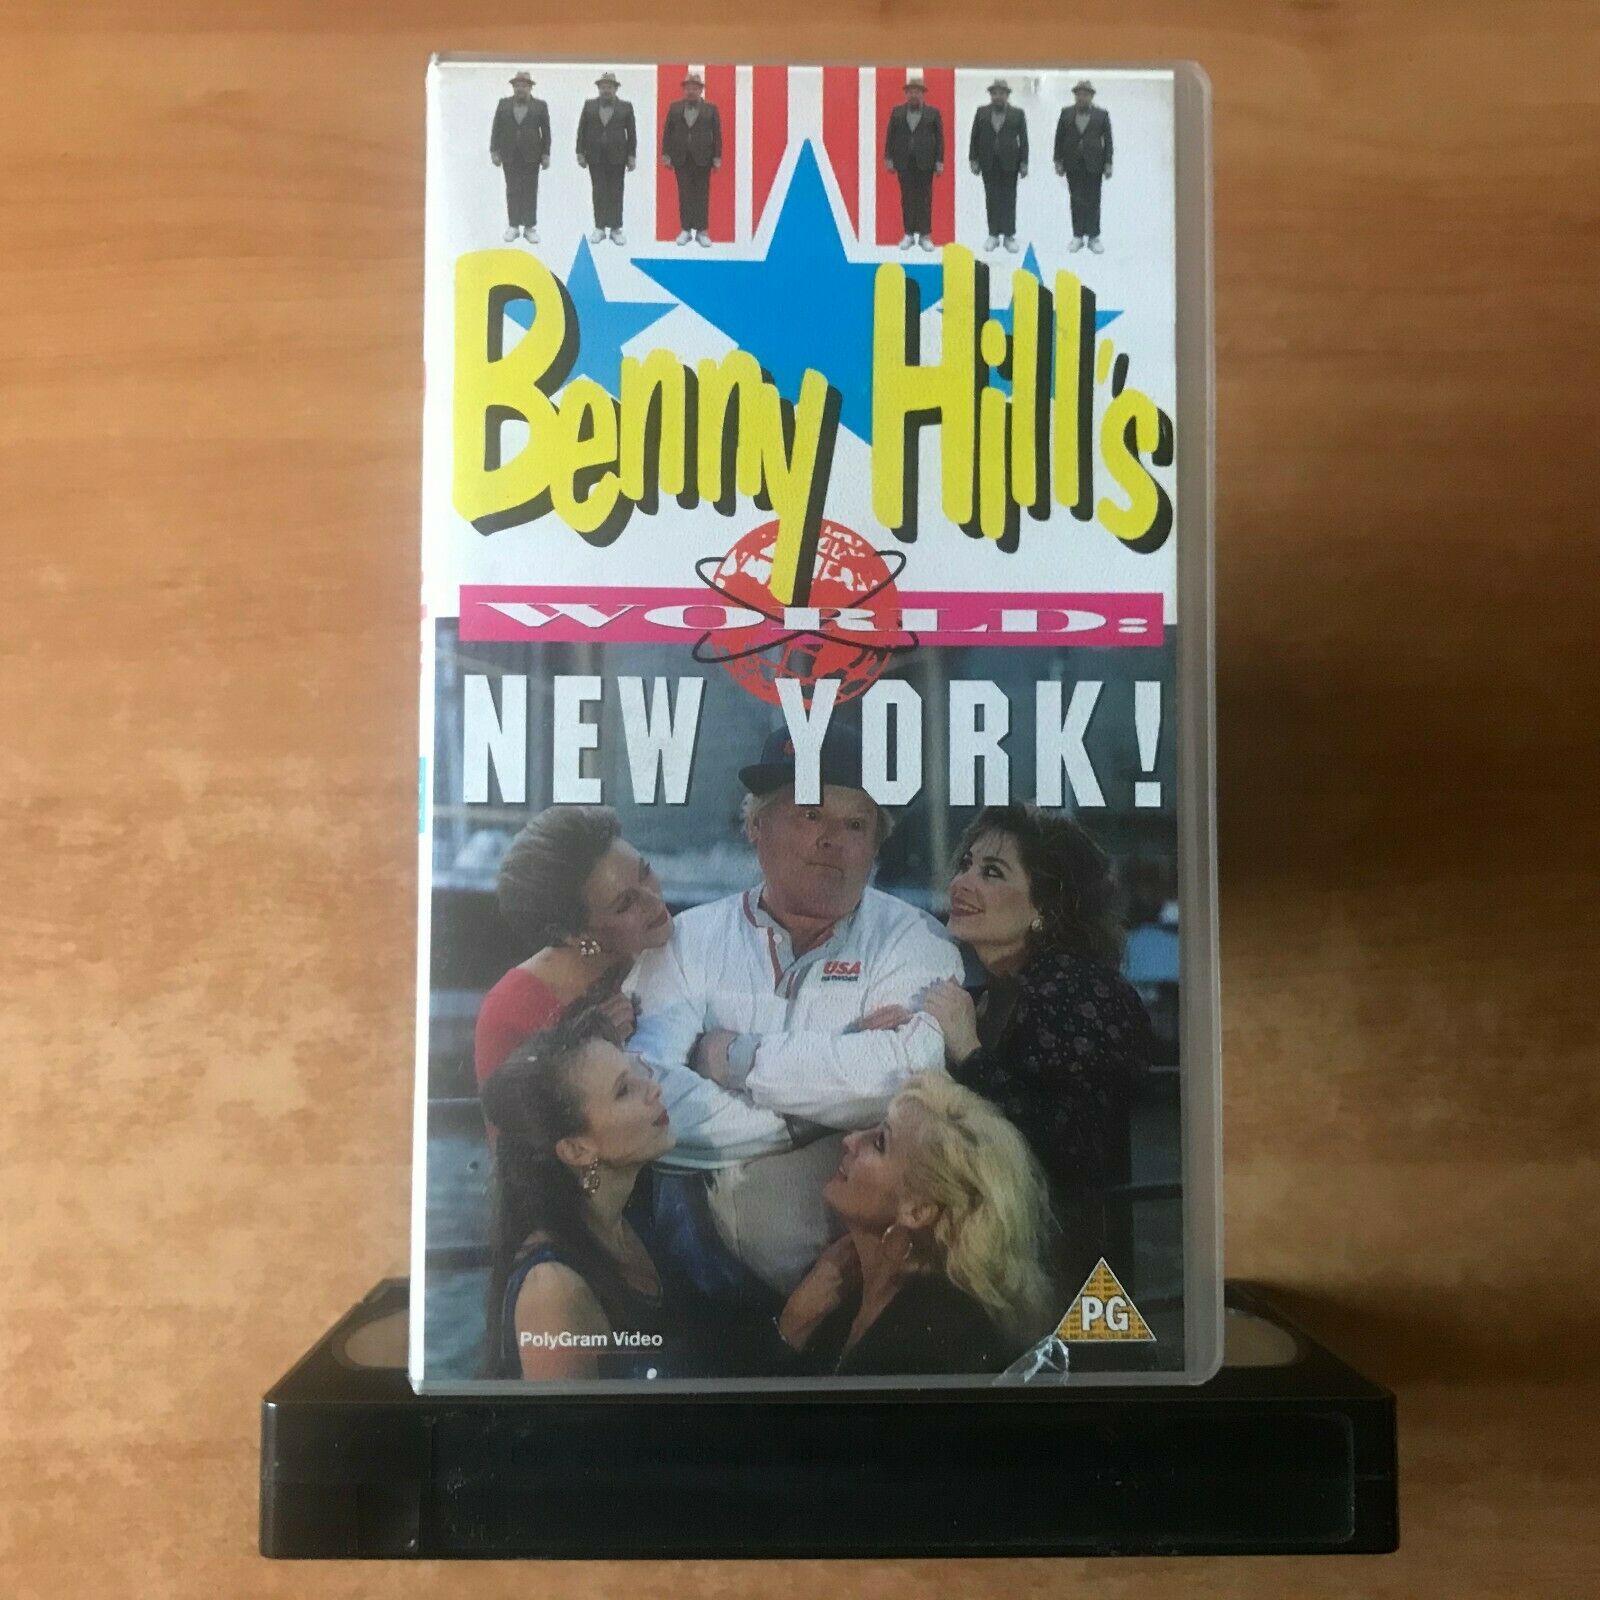 Benny Hill [World Tour: New York] Times Square - Central Park - Comedy - Pal VHS-